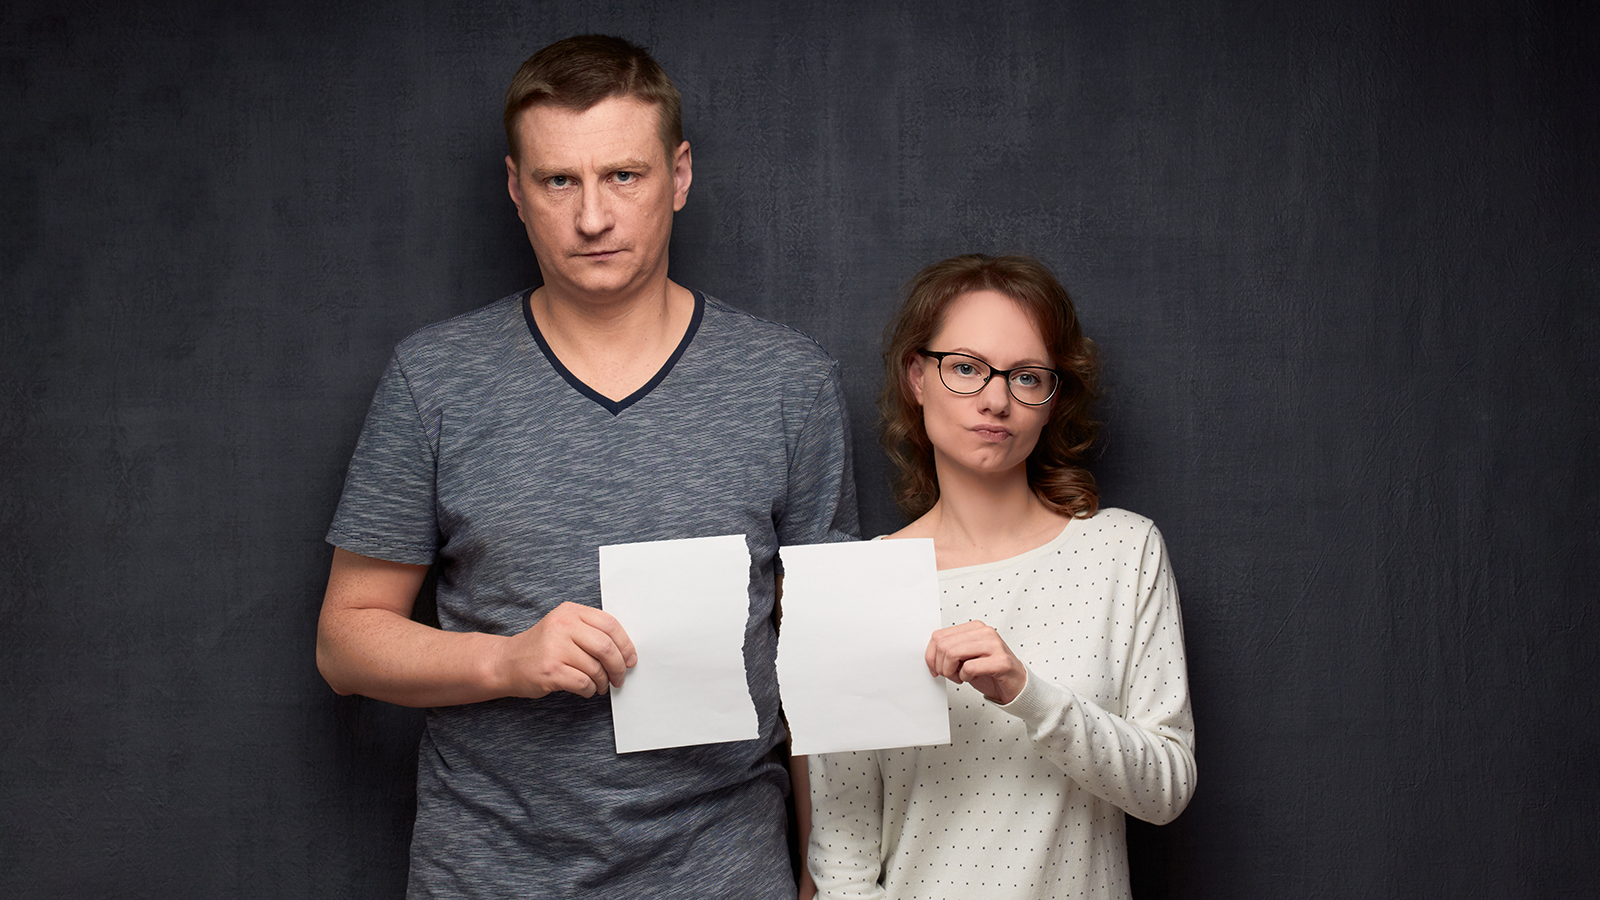 Studio half-length portrait of dissatisfied caucasian couple dressed casually, holding parts of torn white paper sheet in hands, looking with displeasure at camera, standing over gray background